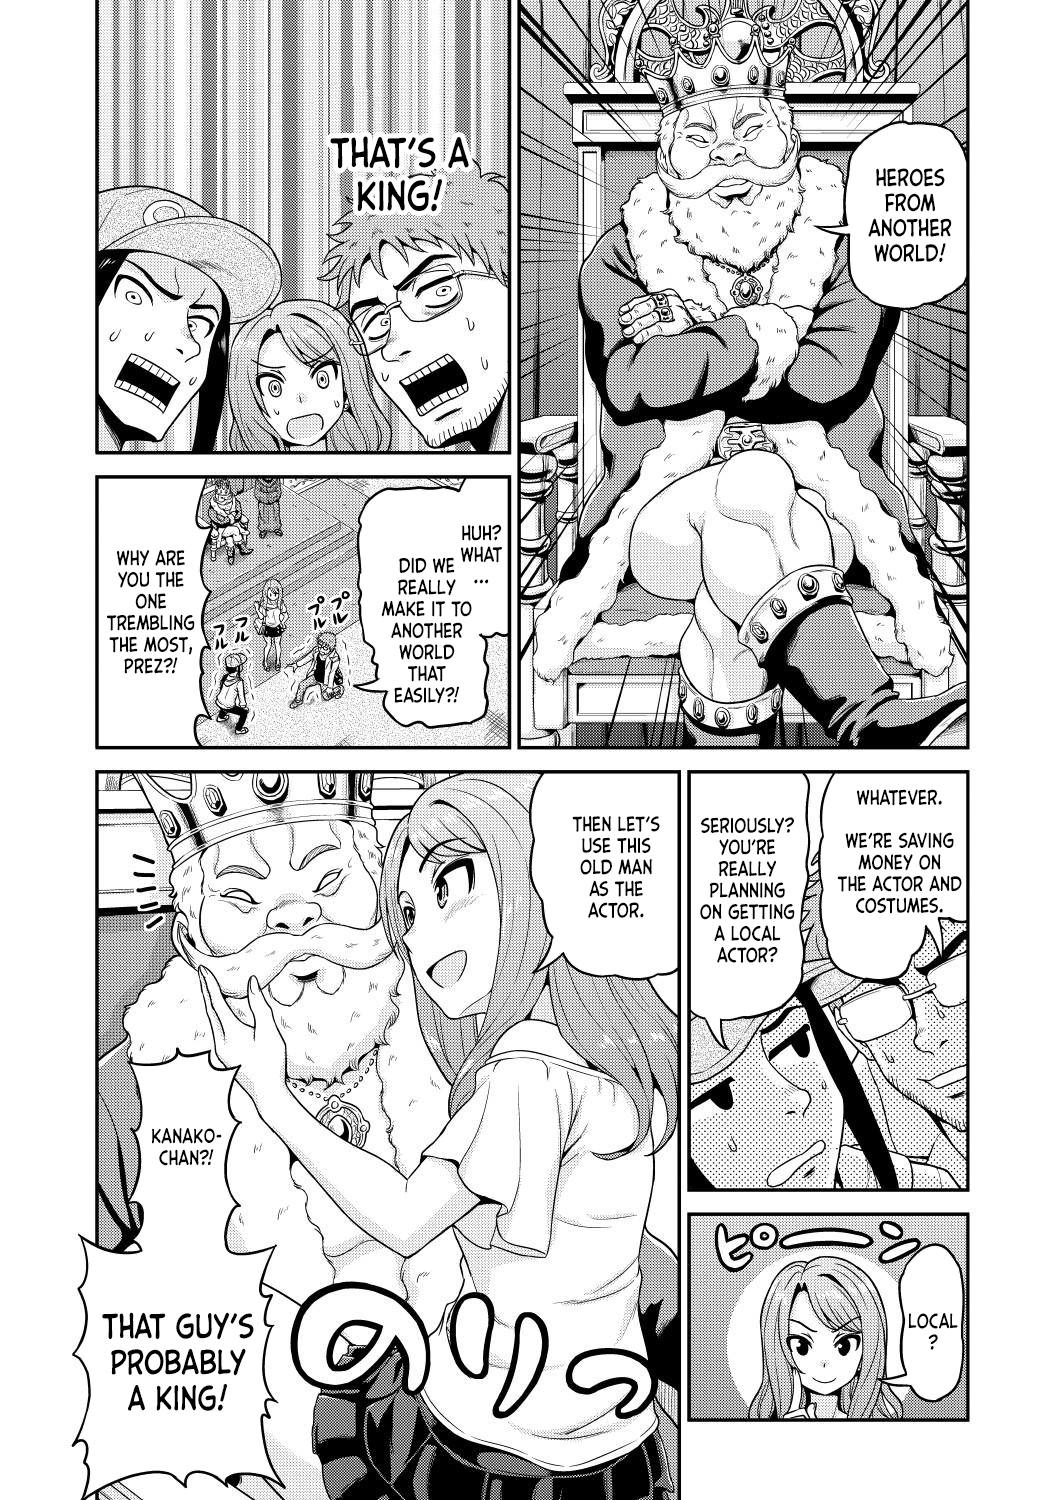 Filming Adult Videos in Another World - Chapter 1 Page 6